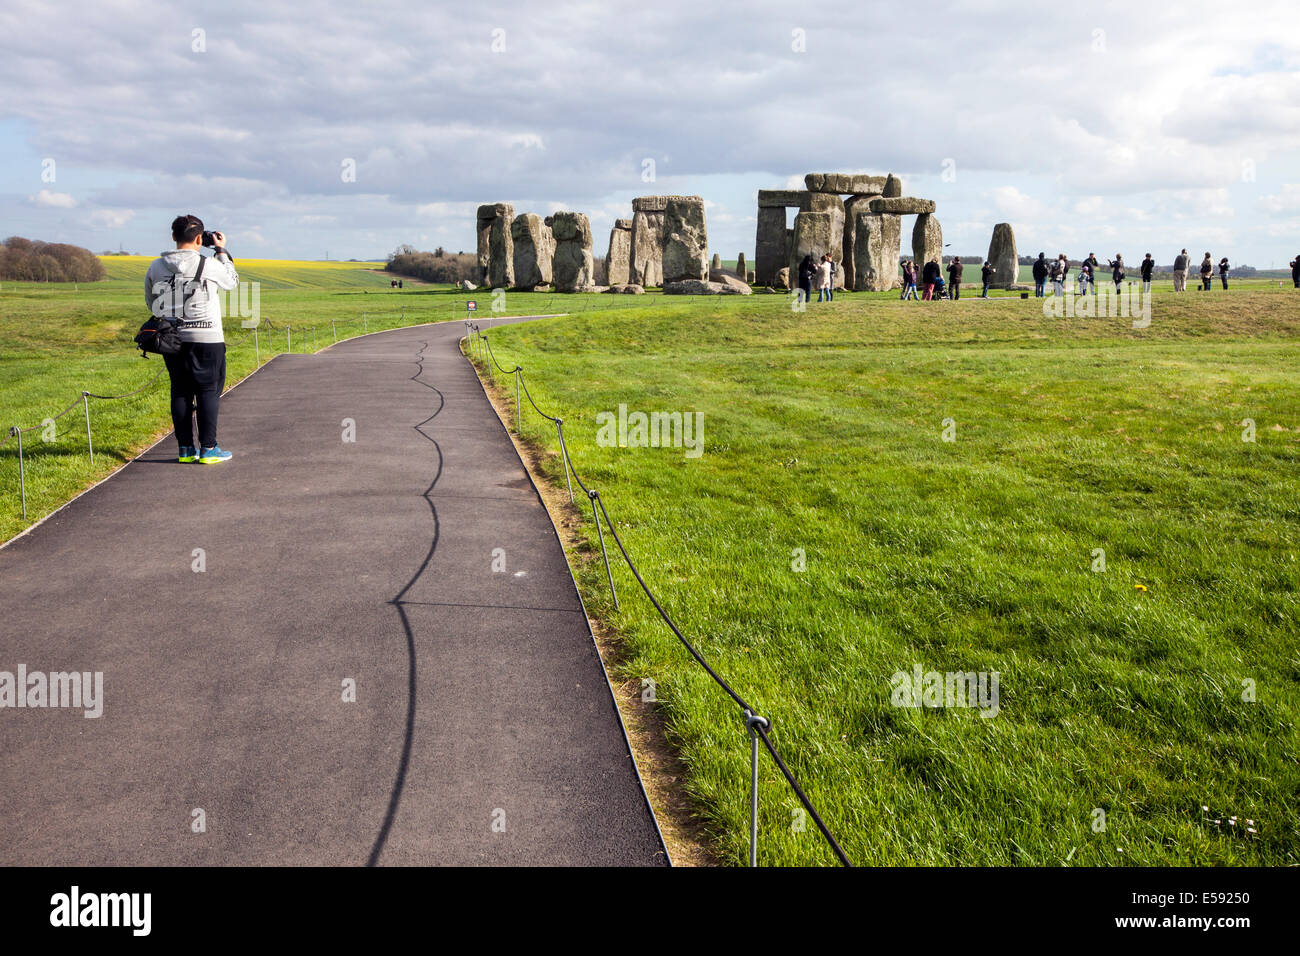 Tourists photograph the stones at the standing stone circle at Stonehenge, Wiltshire, UK Stock Photo